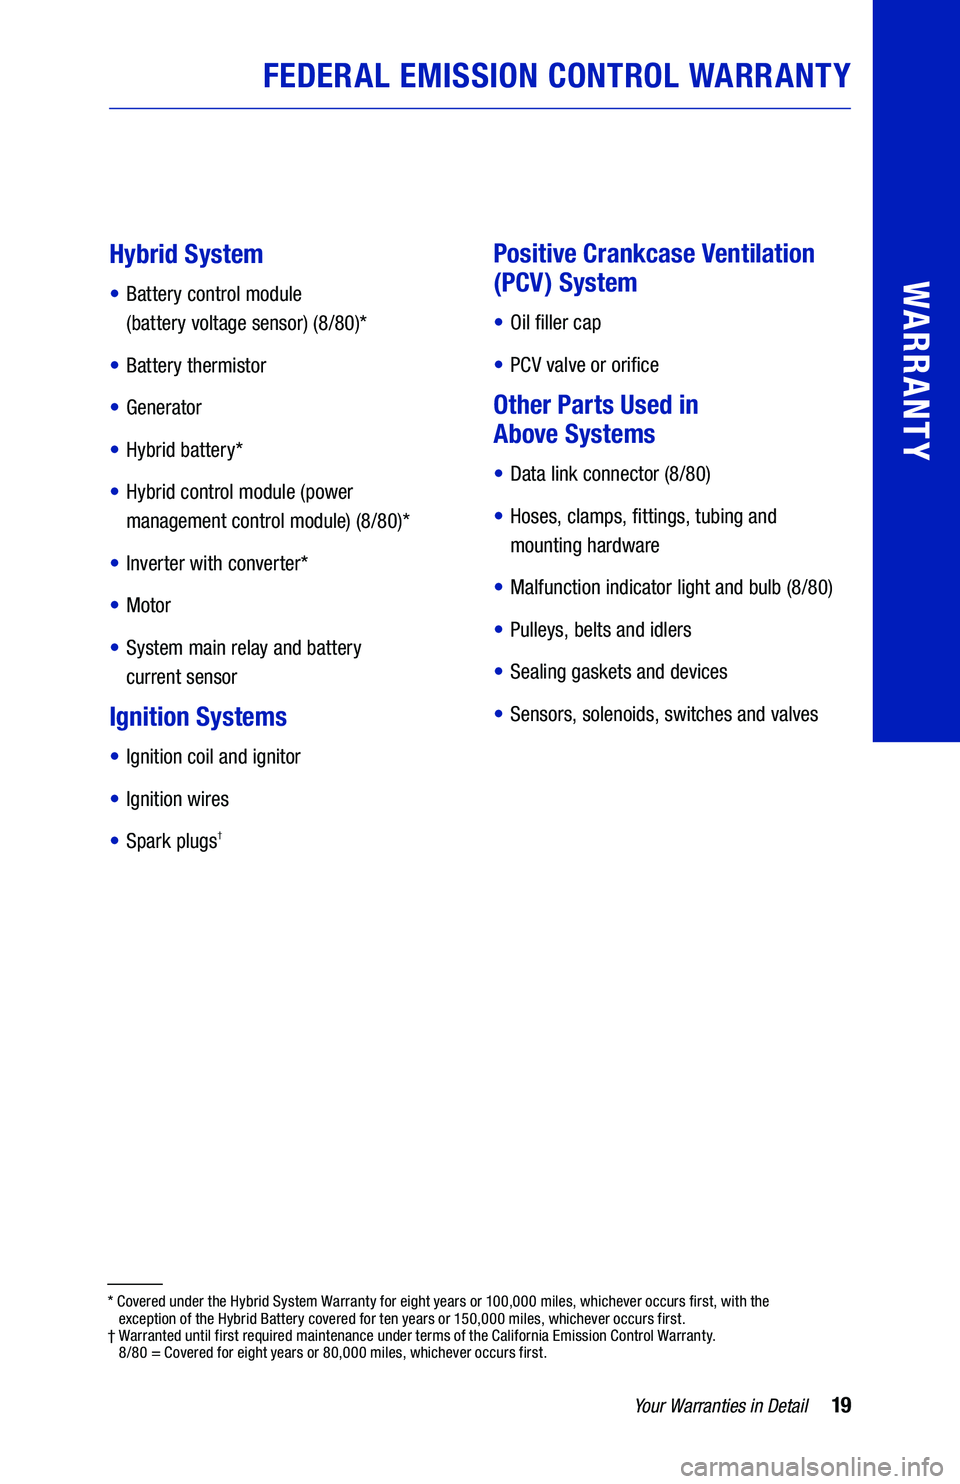 TOYOTA PRIUS 2020  Warranties & Maintenance Guides (in English) 19
 
 
Hybrid System
•  Battery control module  
(battery voltage sensor) (8/80)*
• Battery thermistor
• Generator
• Hybrid battery*
•  Hybrid control module (power  
management control modu